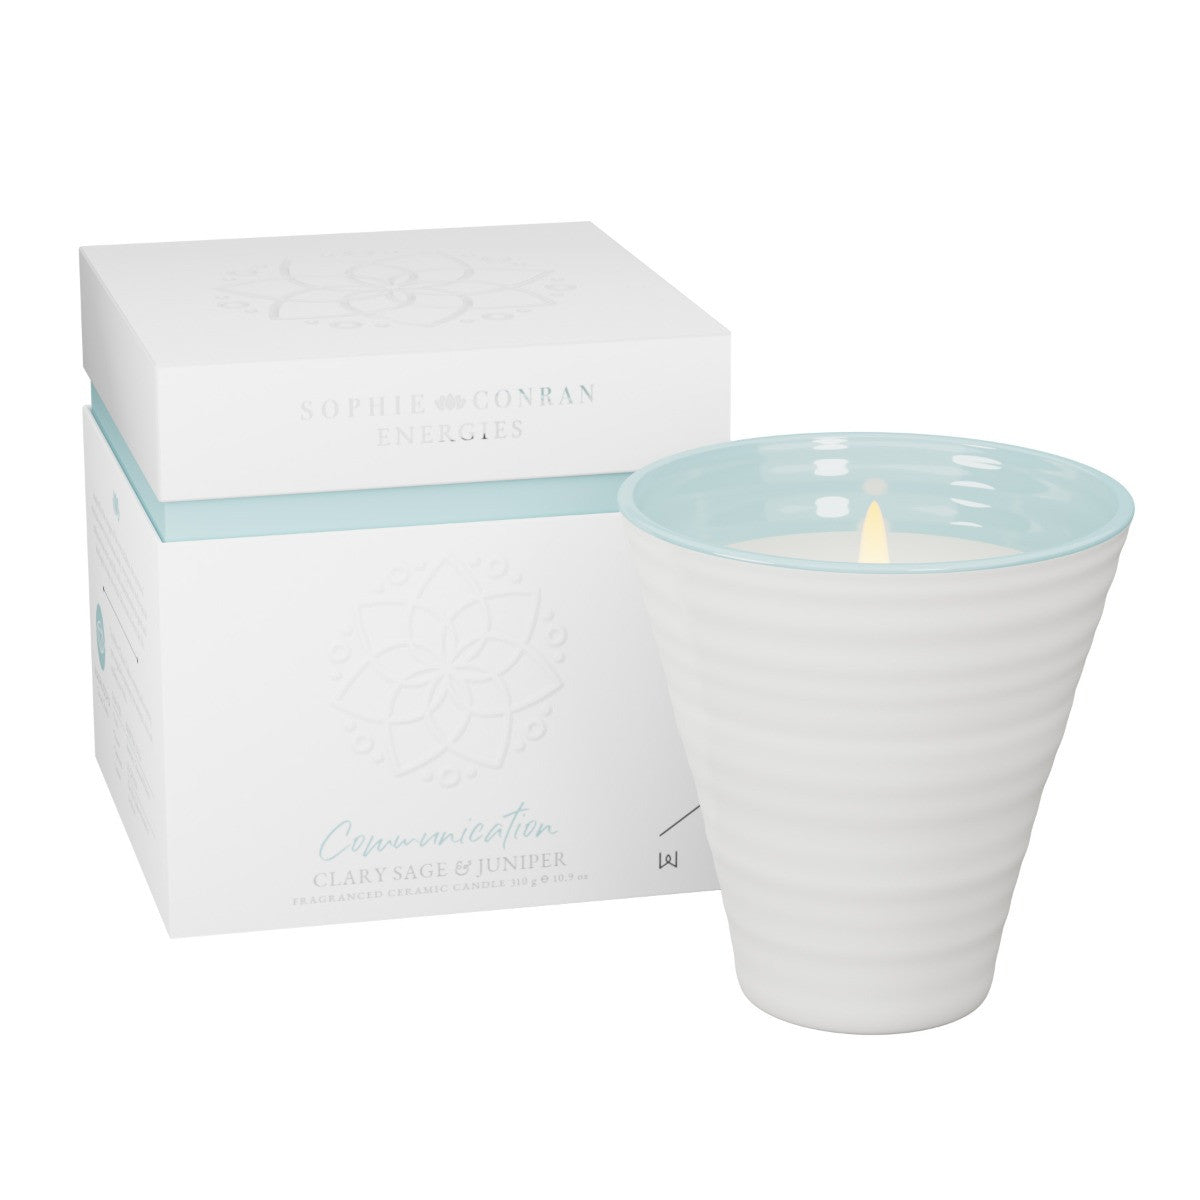 Sophie Conran Energies - Communication Candle by Wax Lyrical. Made in England.